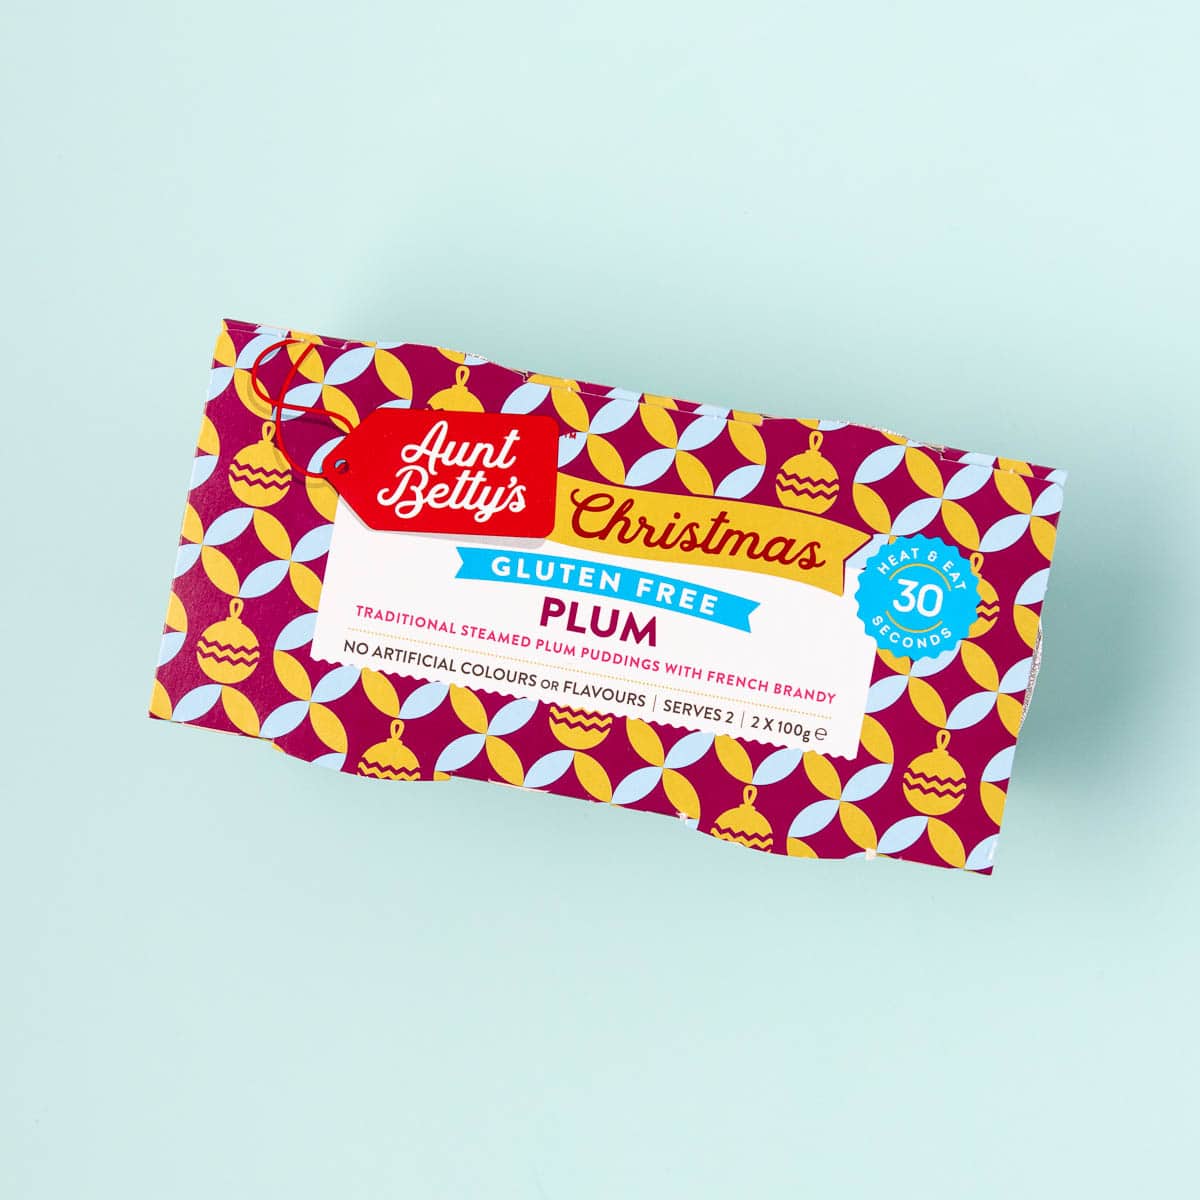 A two-pack of Aunt Betty's gluten free Christmas plum puddings on a mint green background.